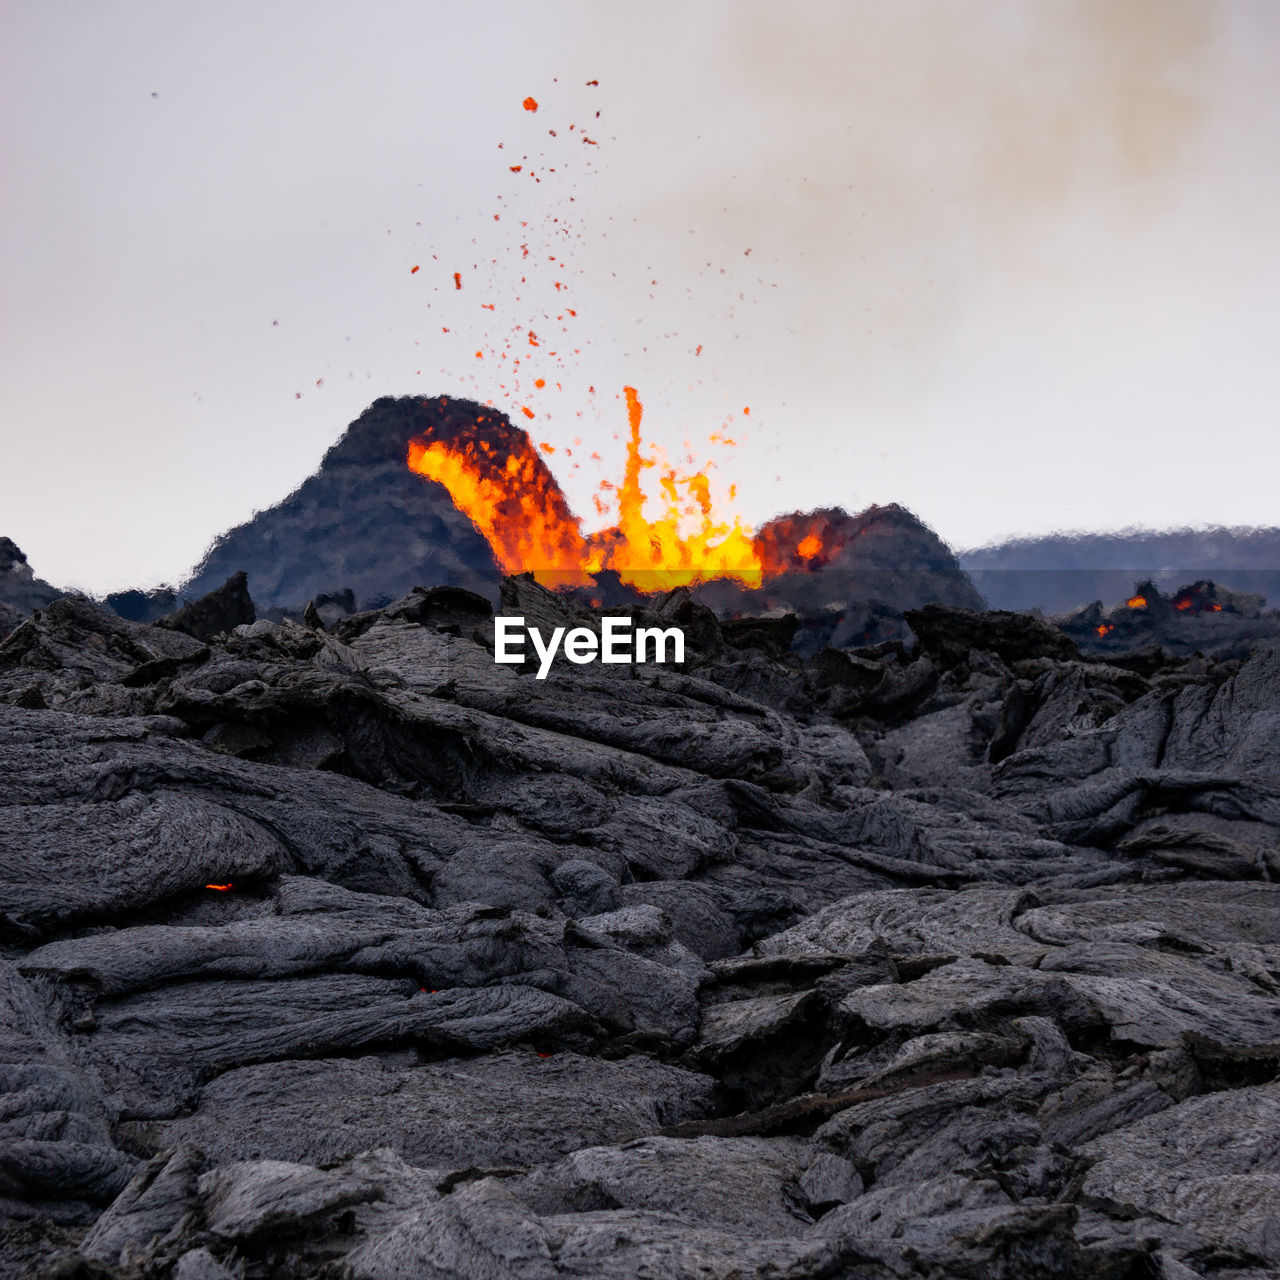 Volcanic eruption in mt fagradalsfjall, southwest iceland. the eruption began in march 2021.